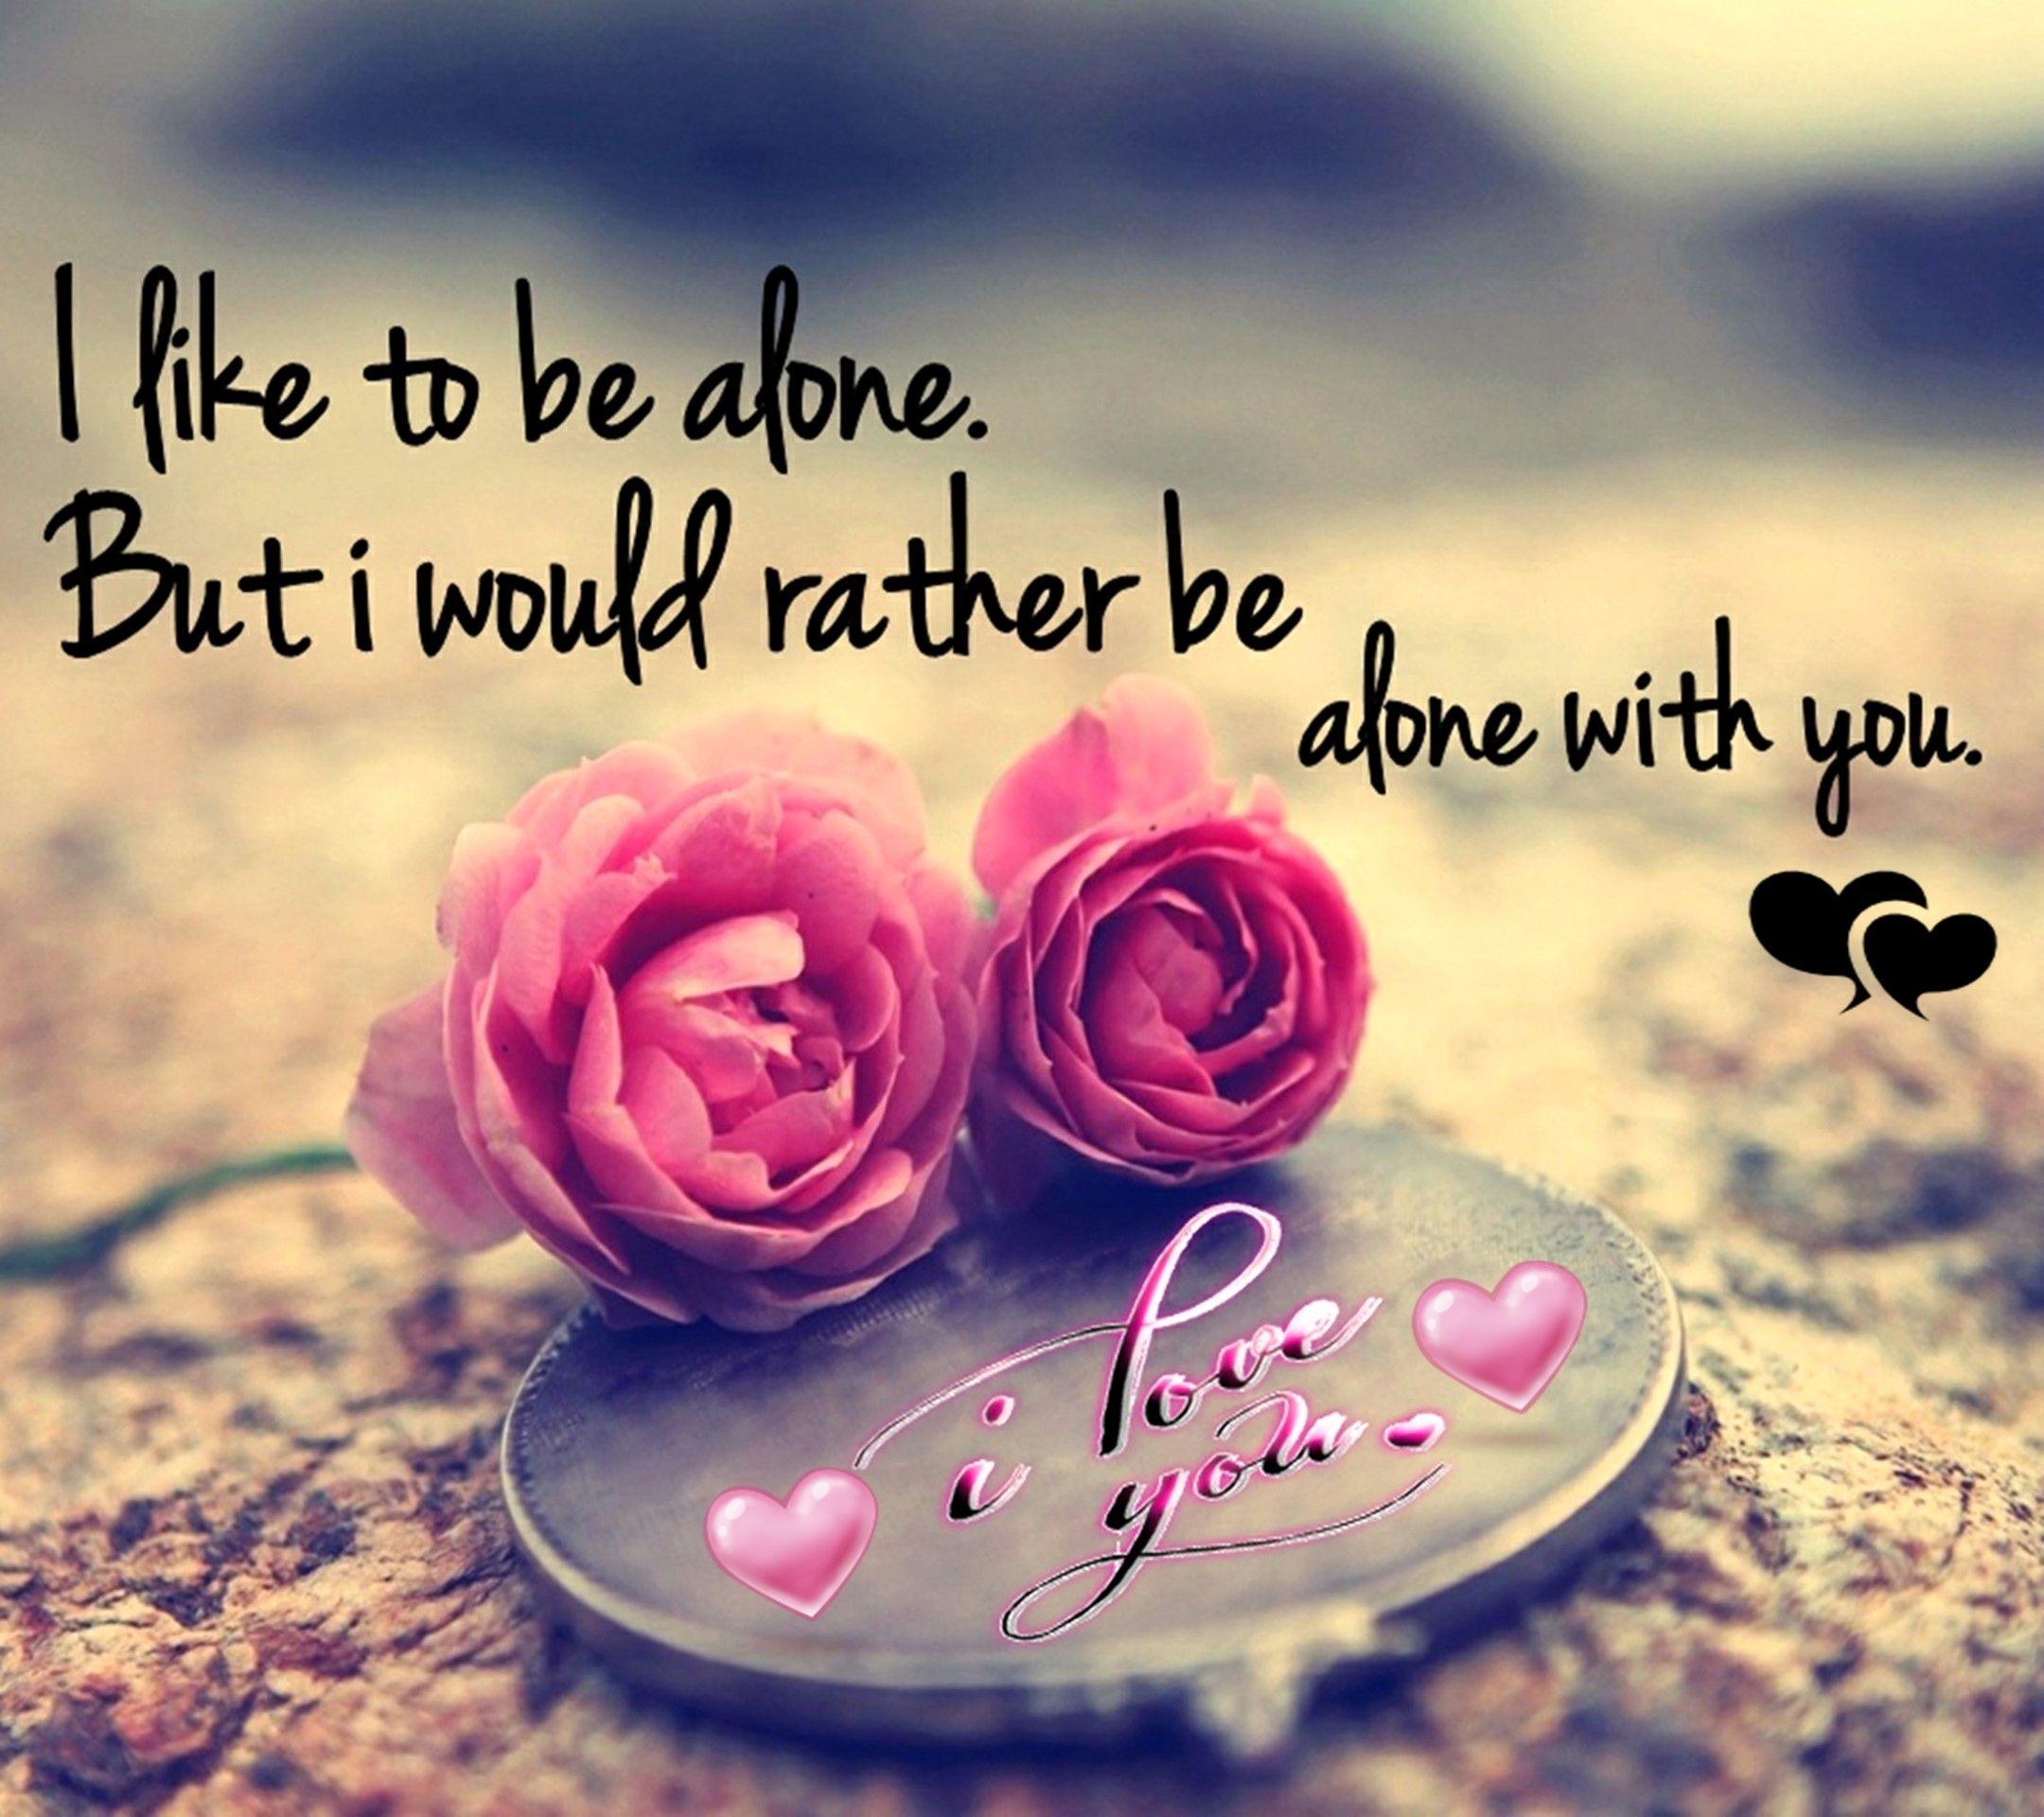 Download Alone with you quote wallpaper for your mobile